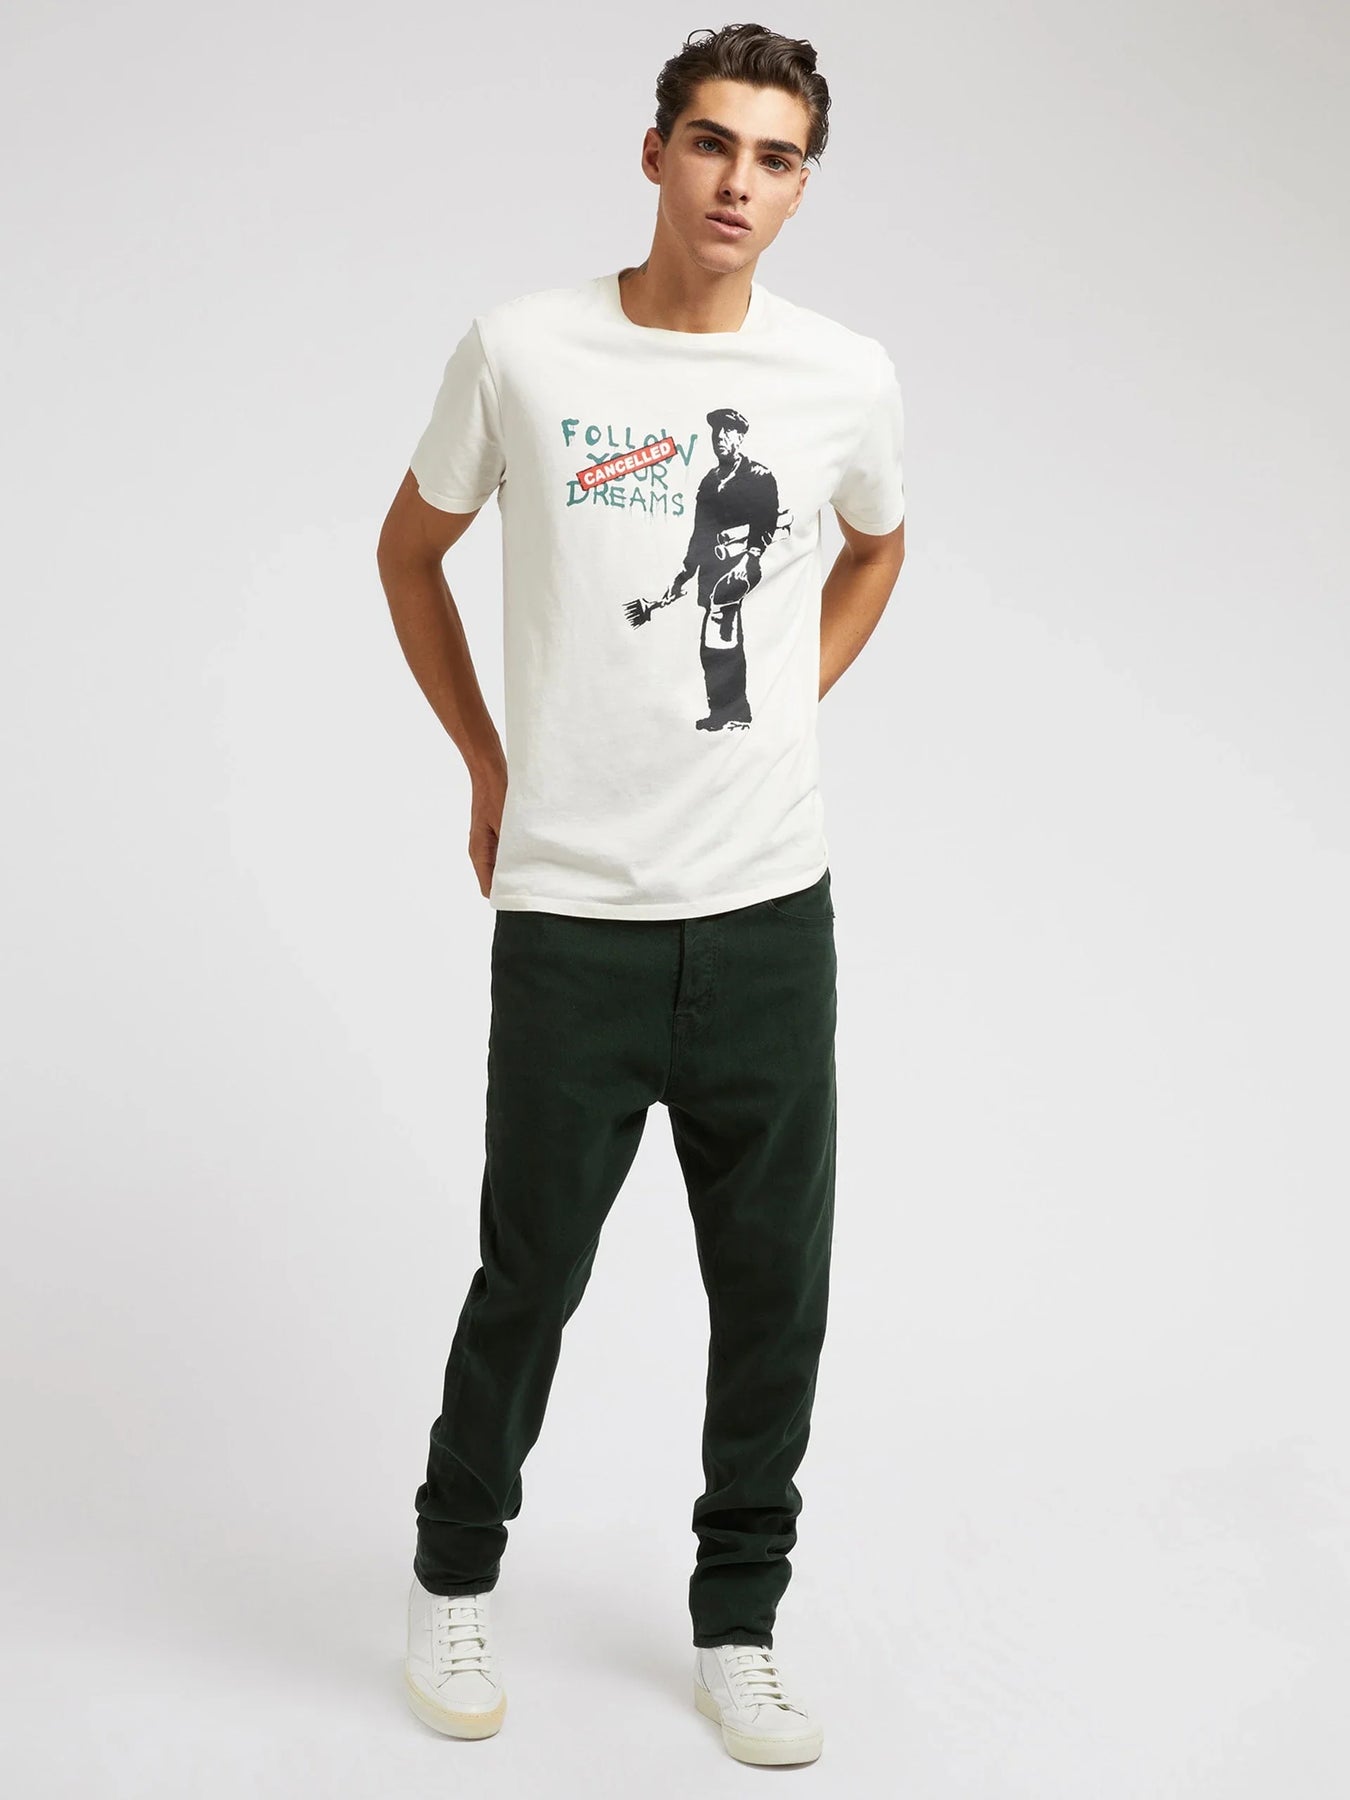 GUESS x BRANDALISED GRAFFITI BY BANKSY SS CANCELLED DREAMS TEE